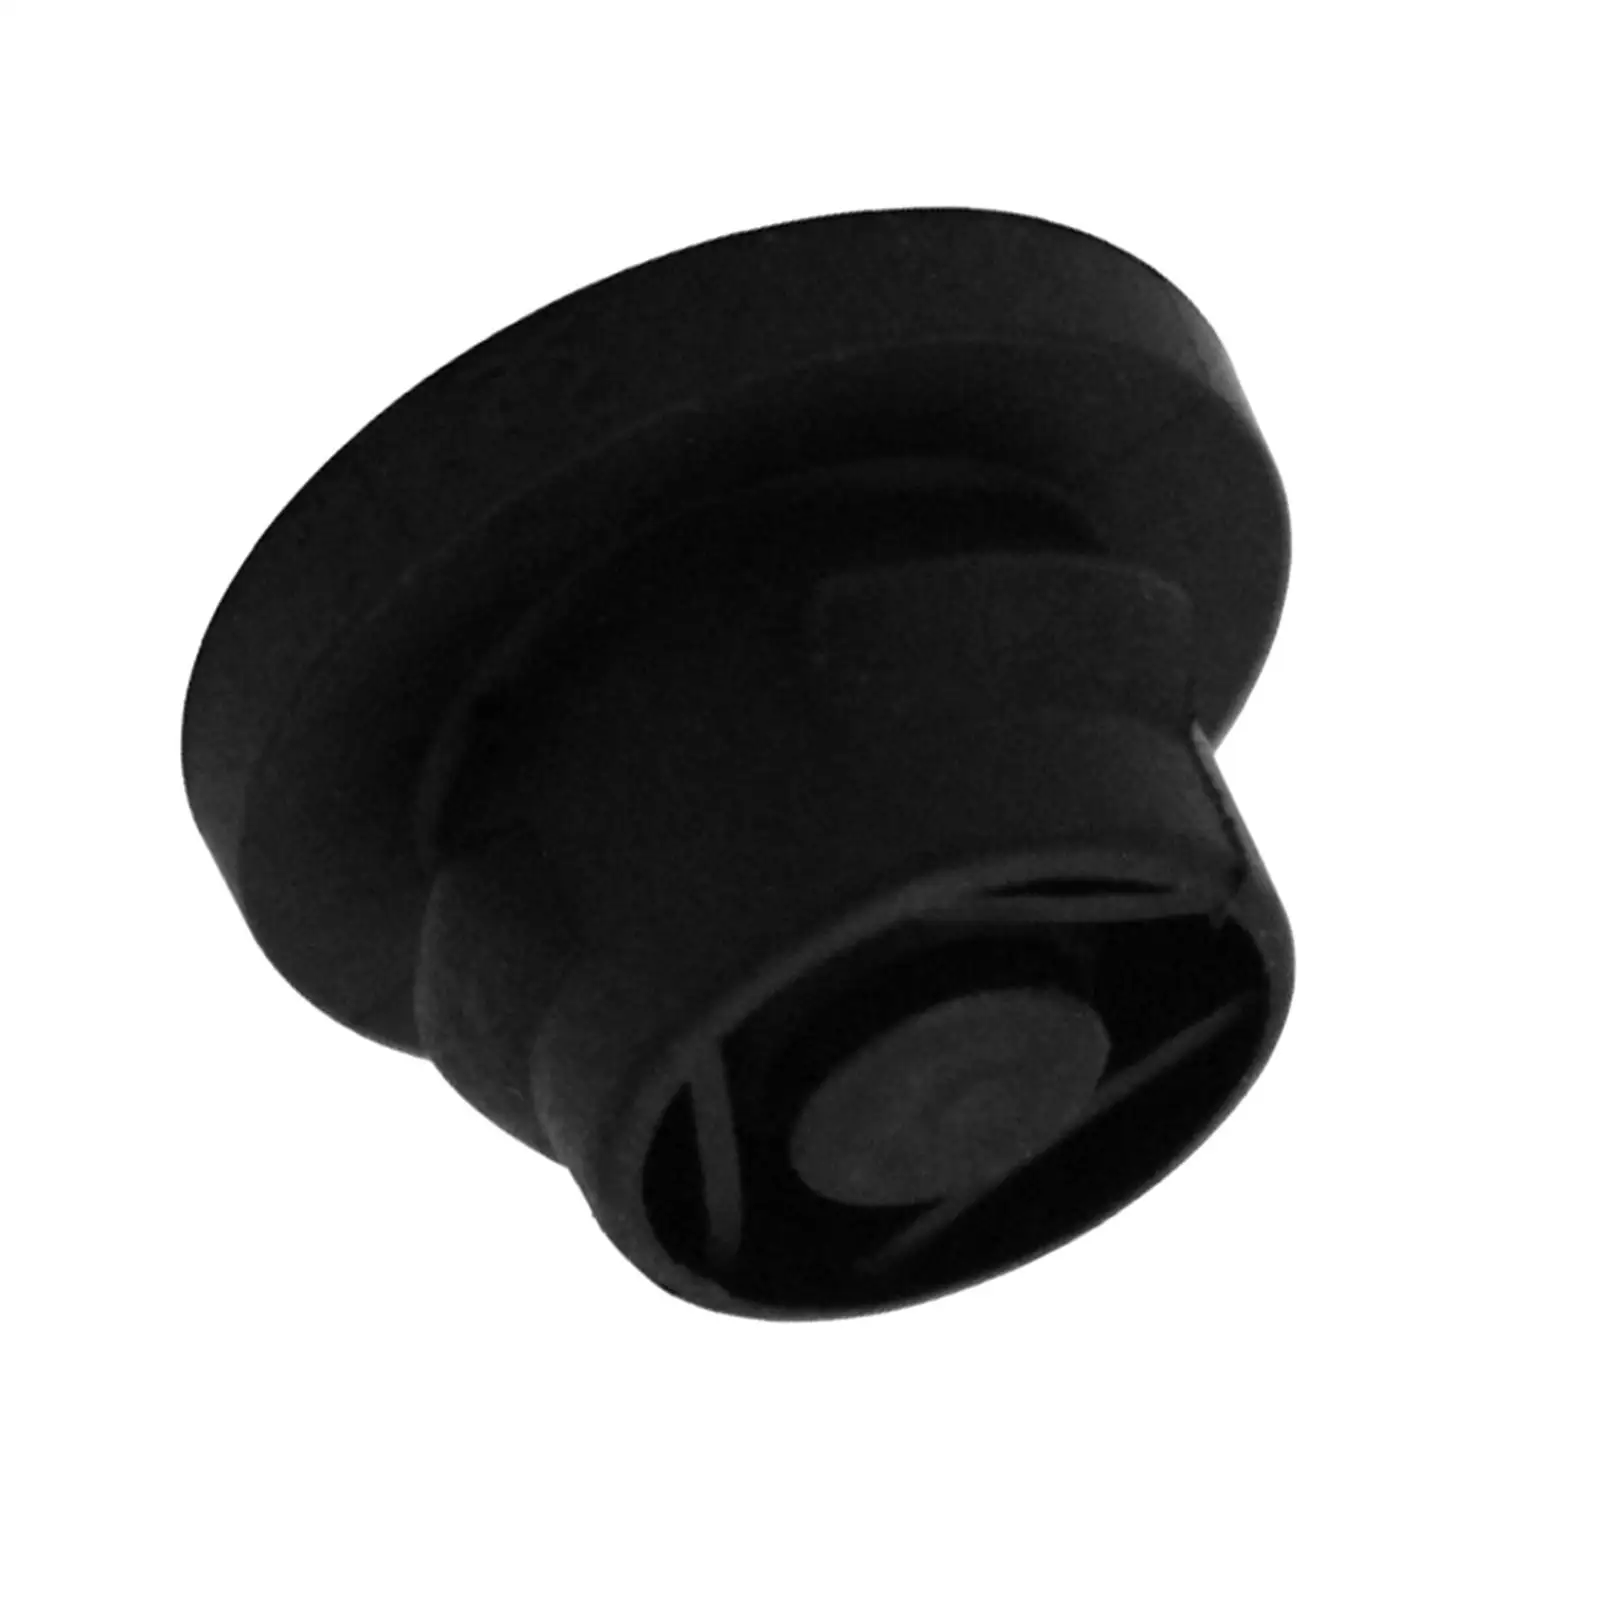 Automotive Air Filter Rubber Insert Fit for 1.6 Hdi for 207